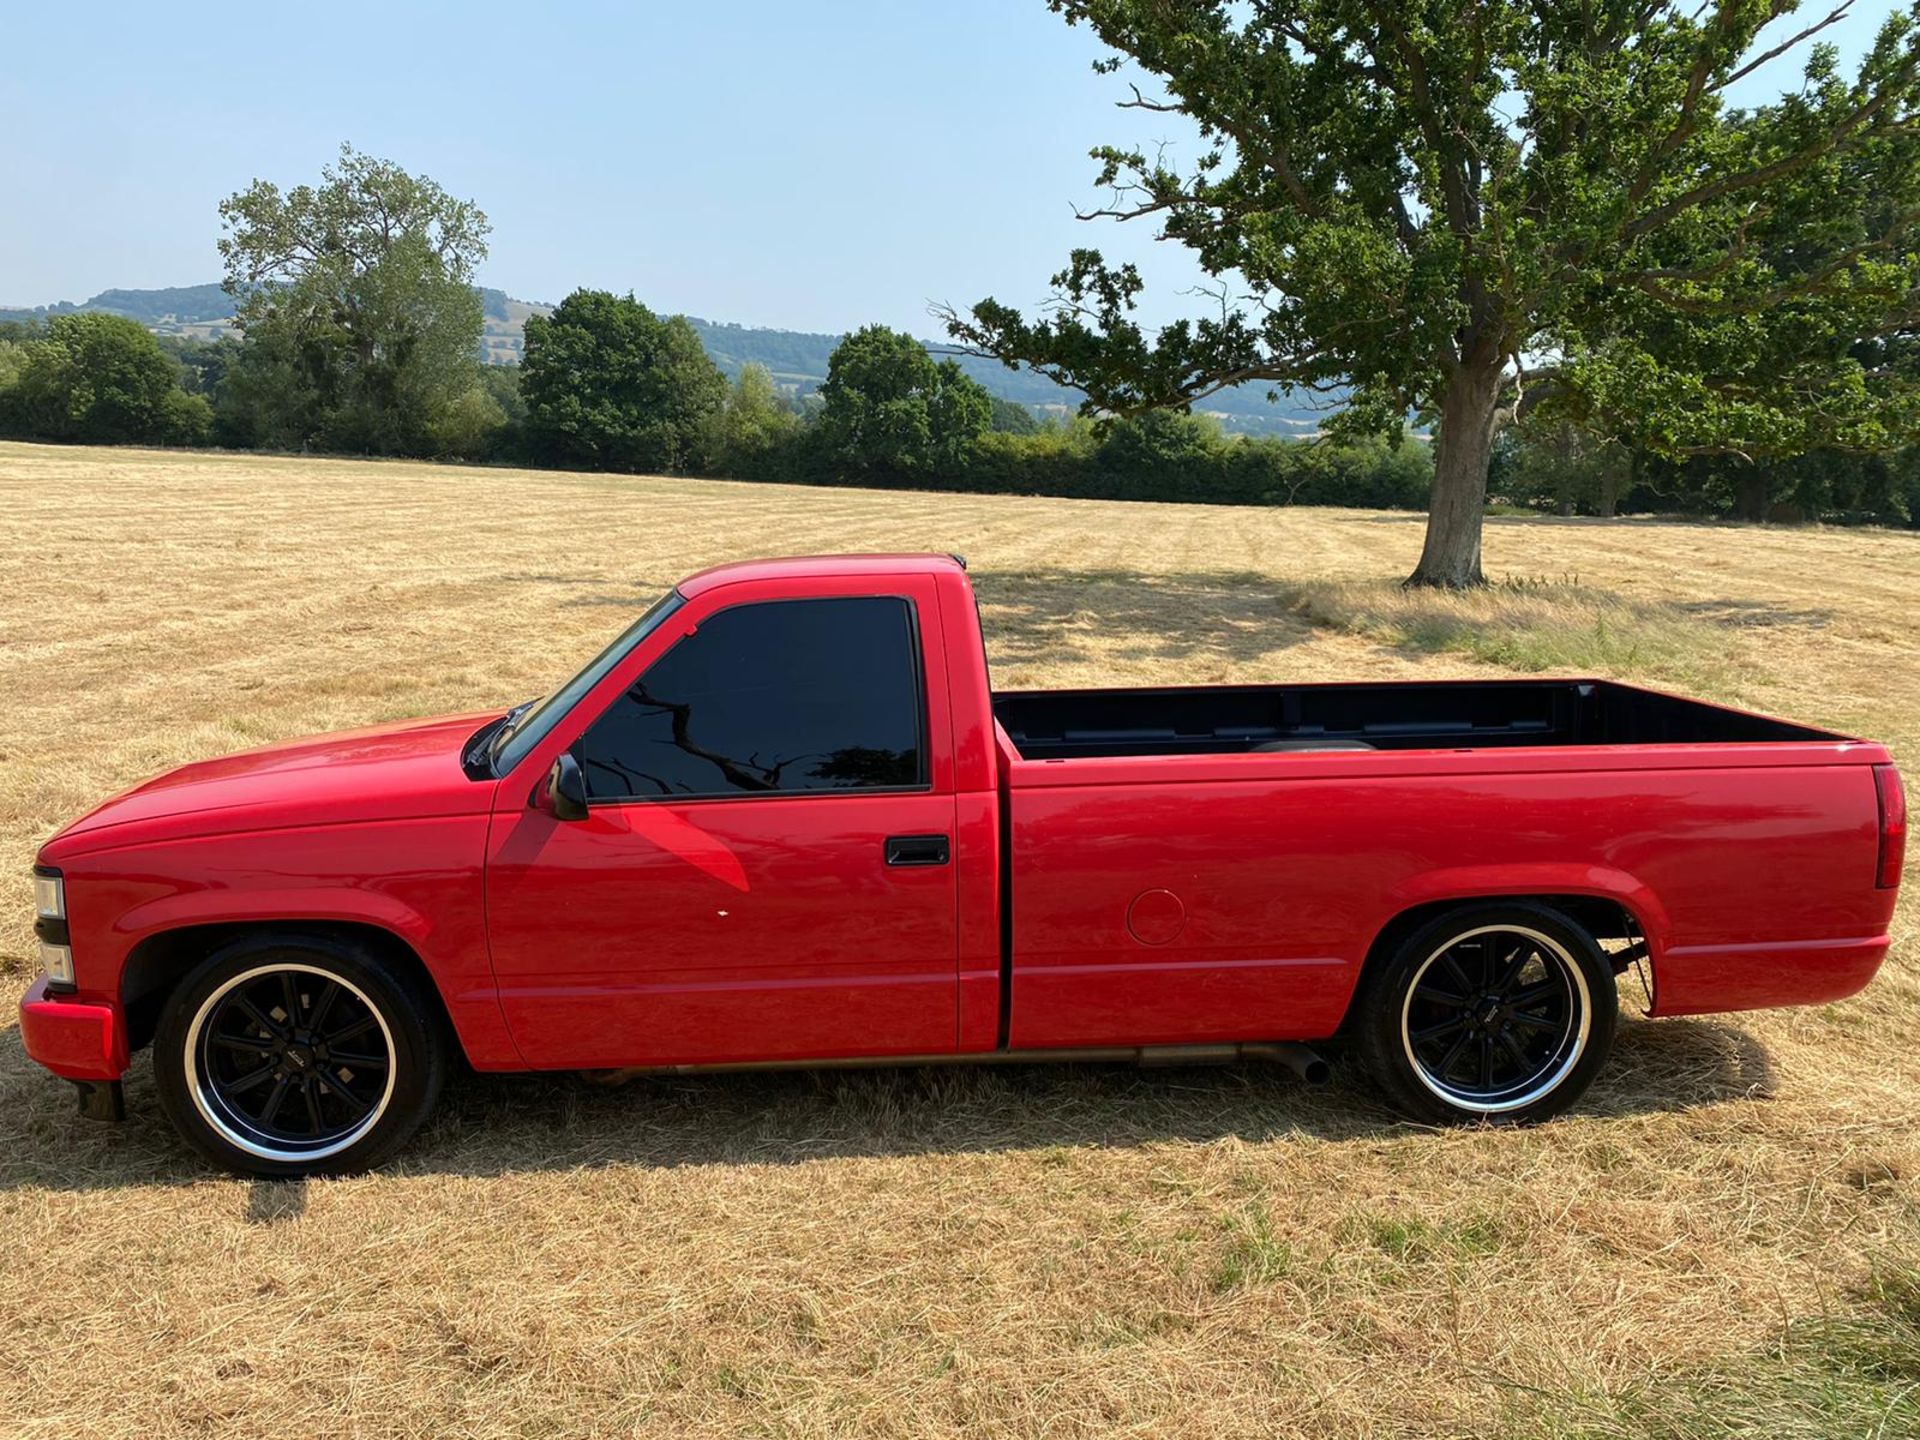 Super Red 1988 Chevrolet C1500 / OBS / GMT-400 - Single cab long bed (8ft) - Image 2 of 15